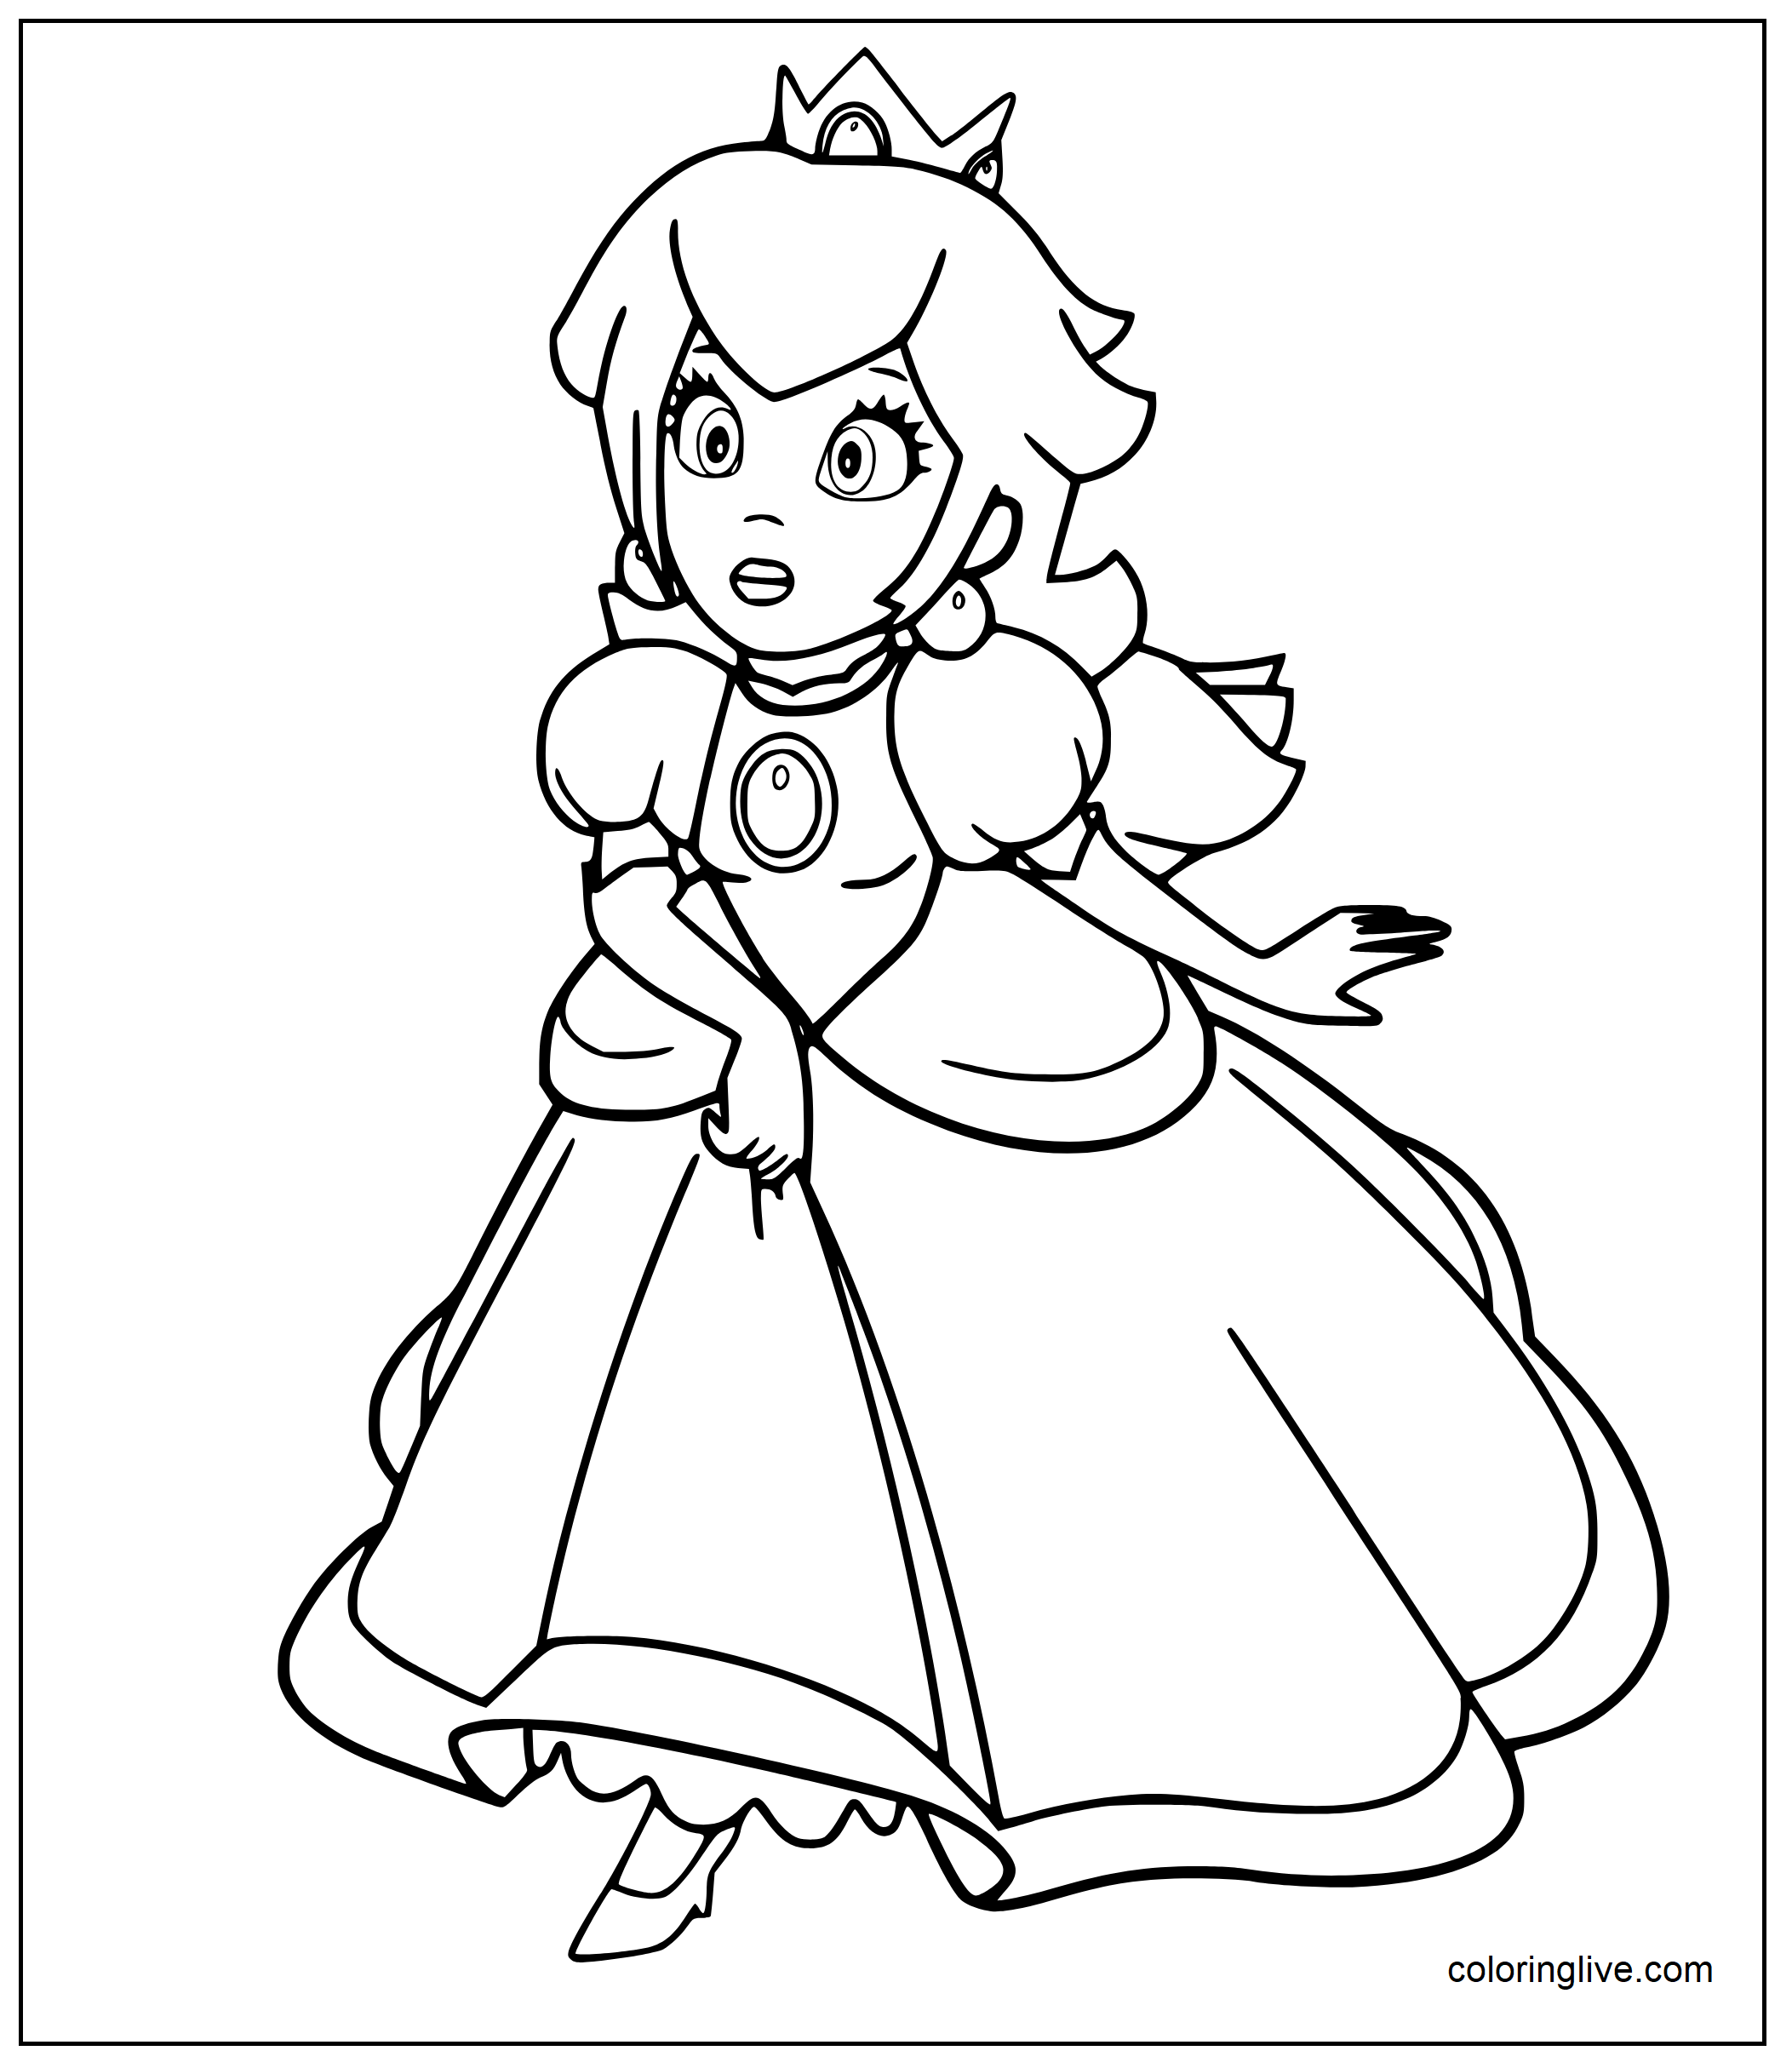 Printable Princess Peach is surprised Coloring Page for kids.